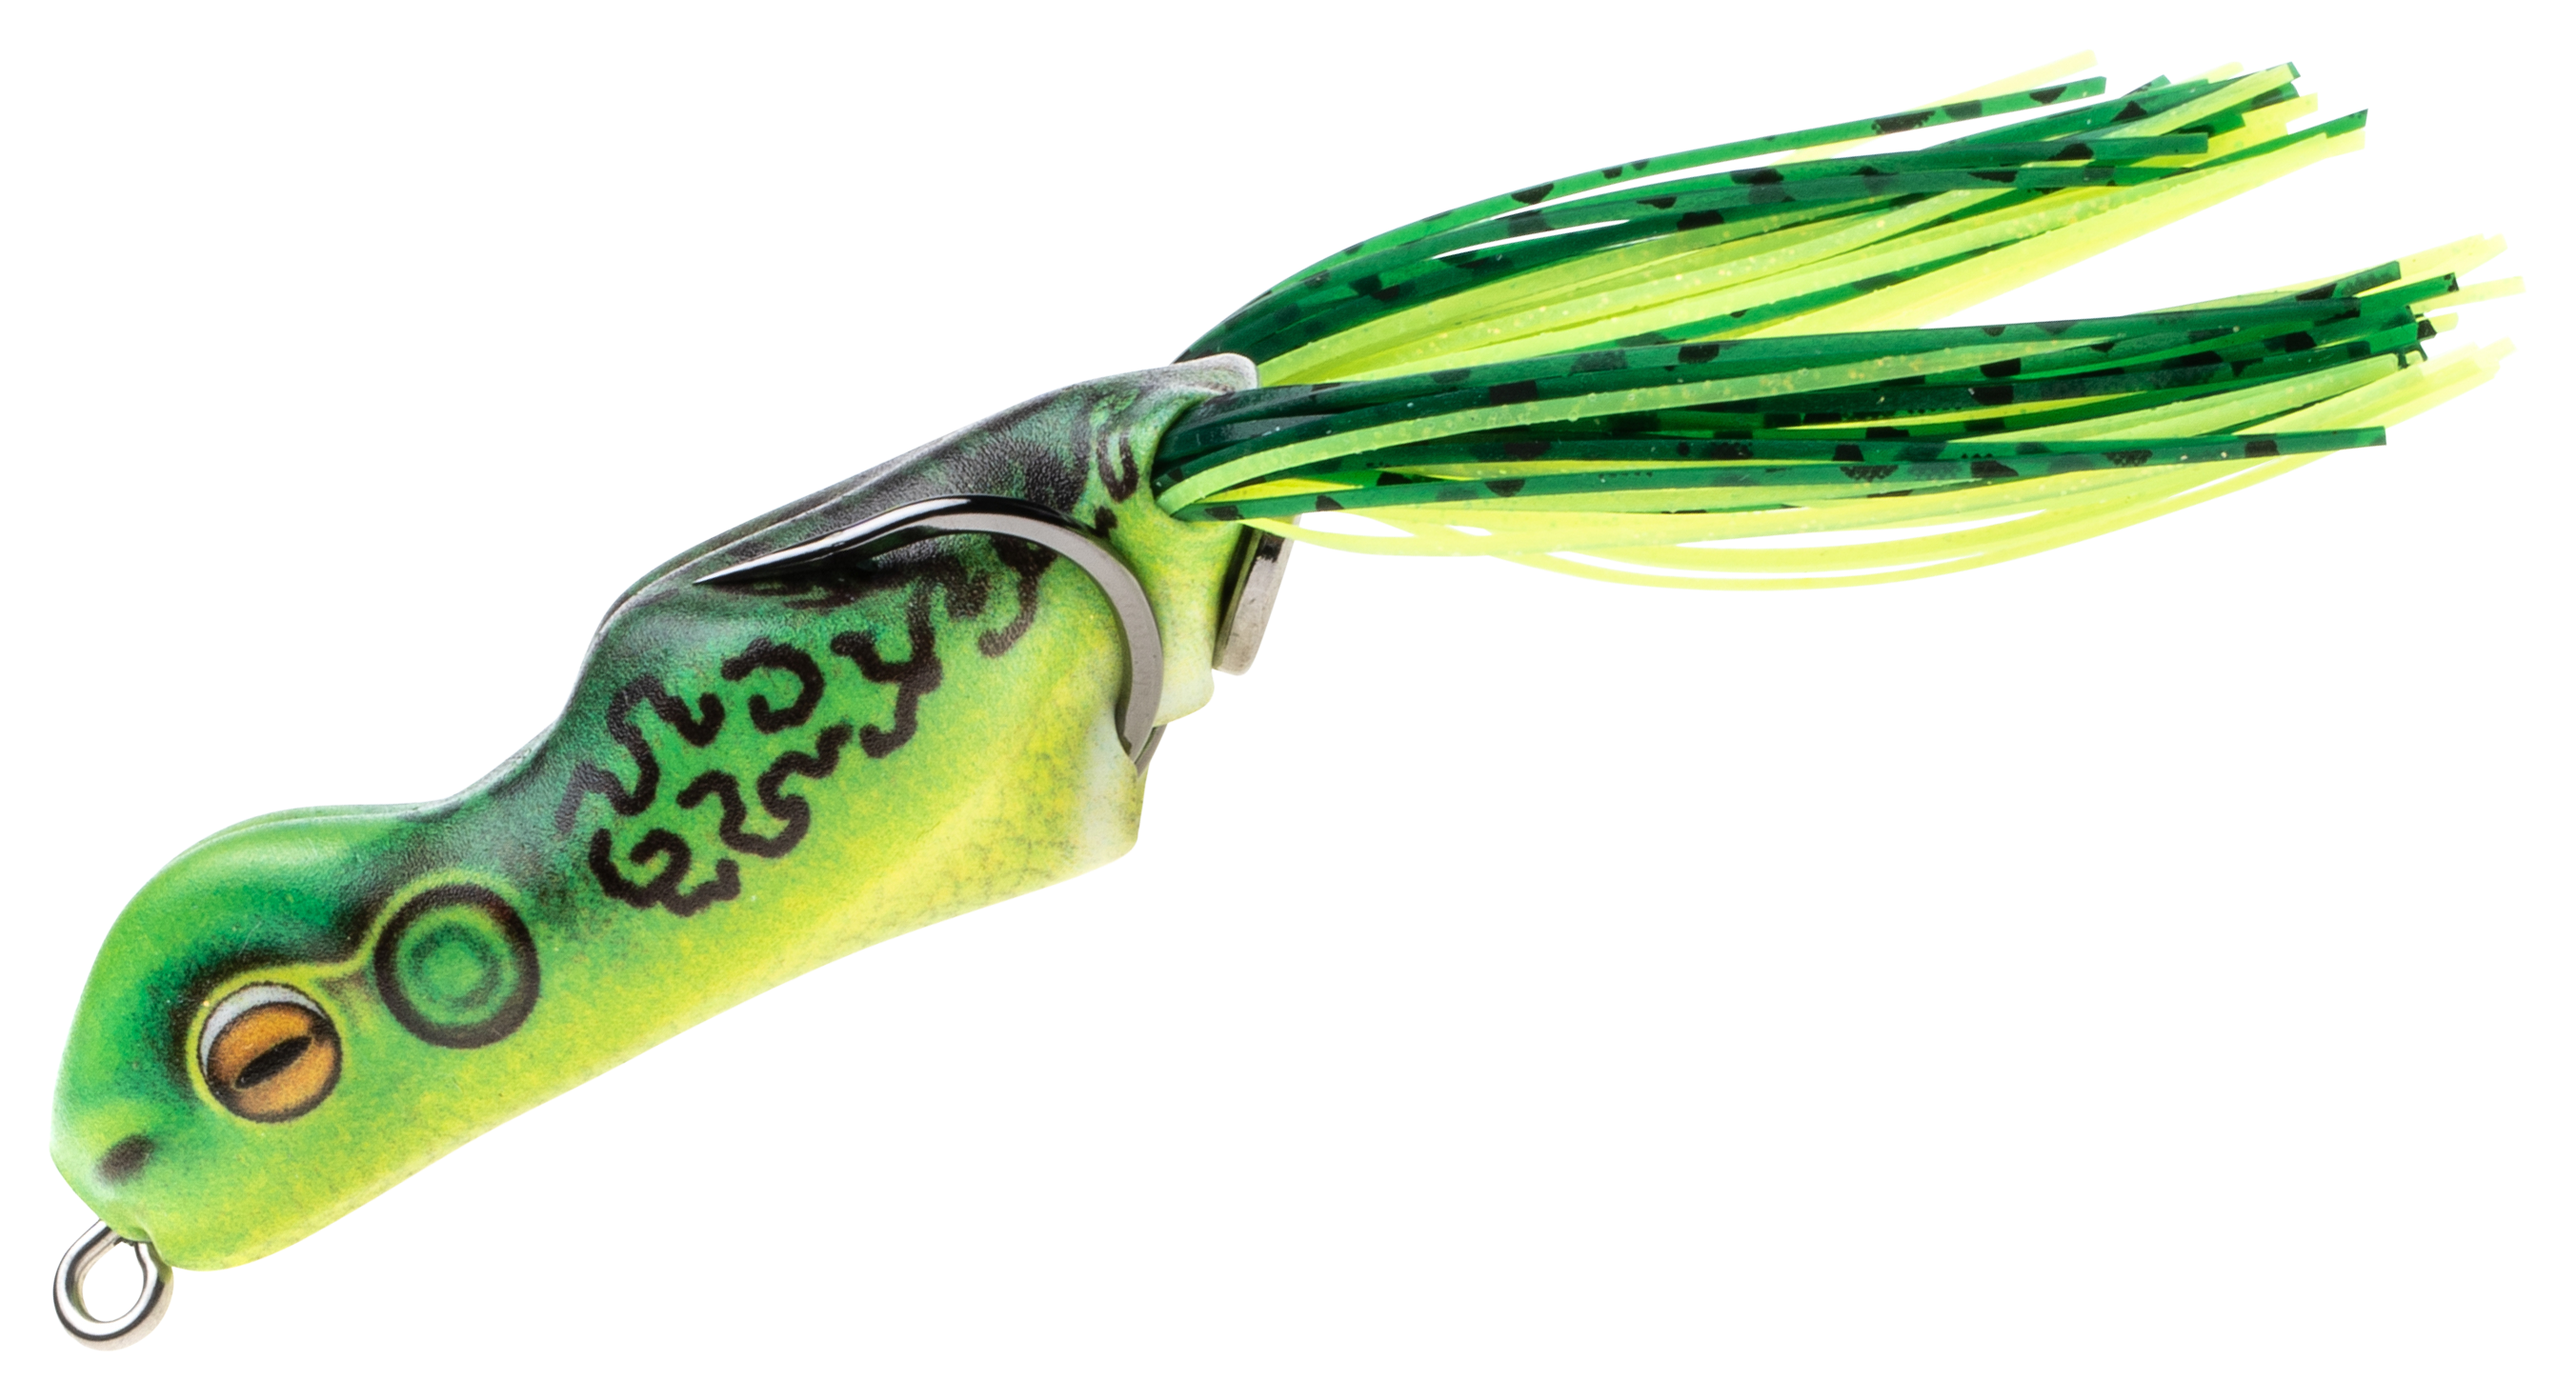  Compatible with Scum Frog BAIT LURES FISHING BASS BOAT